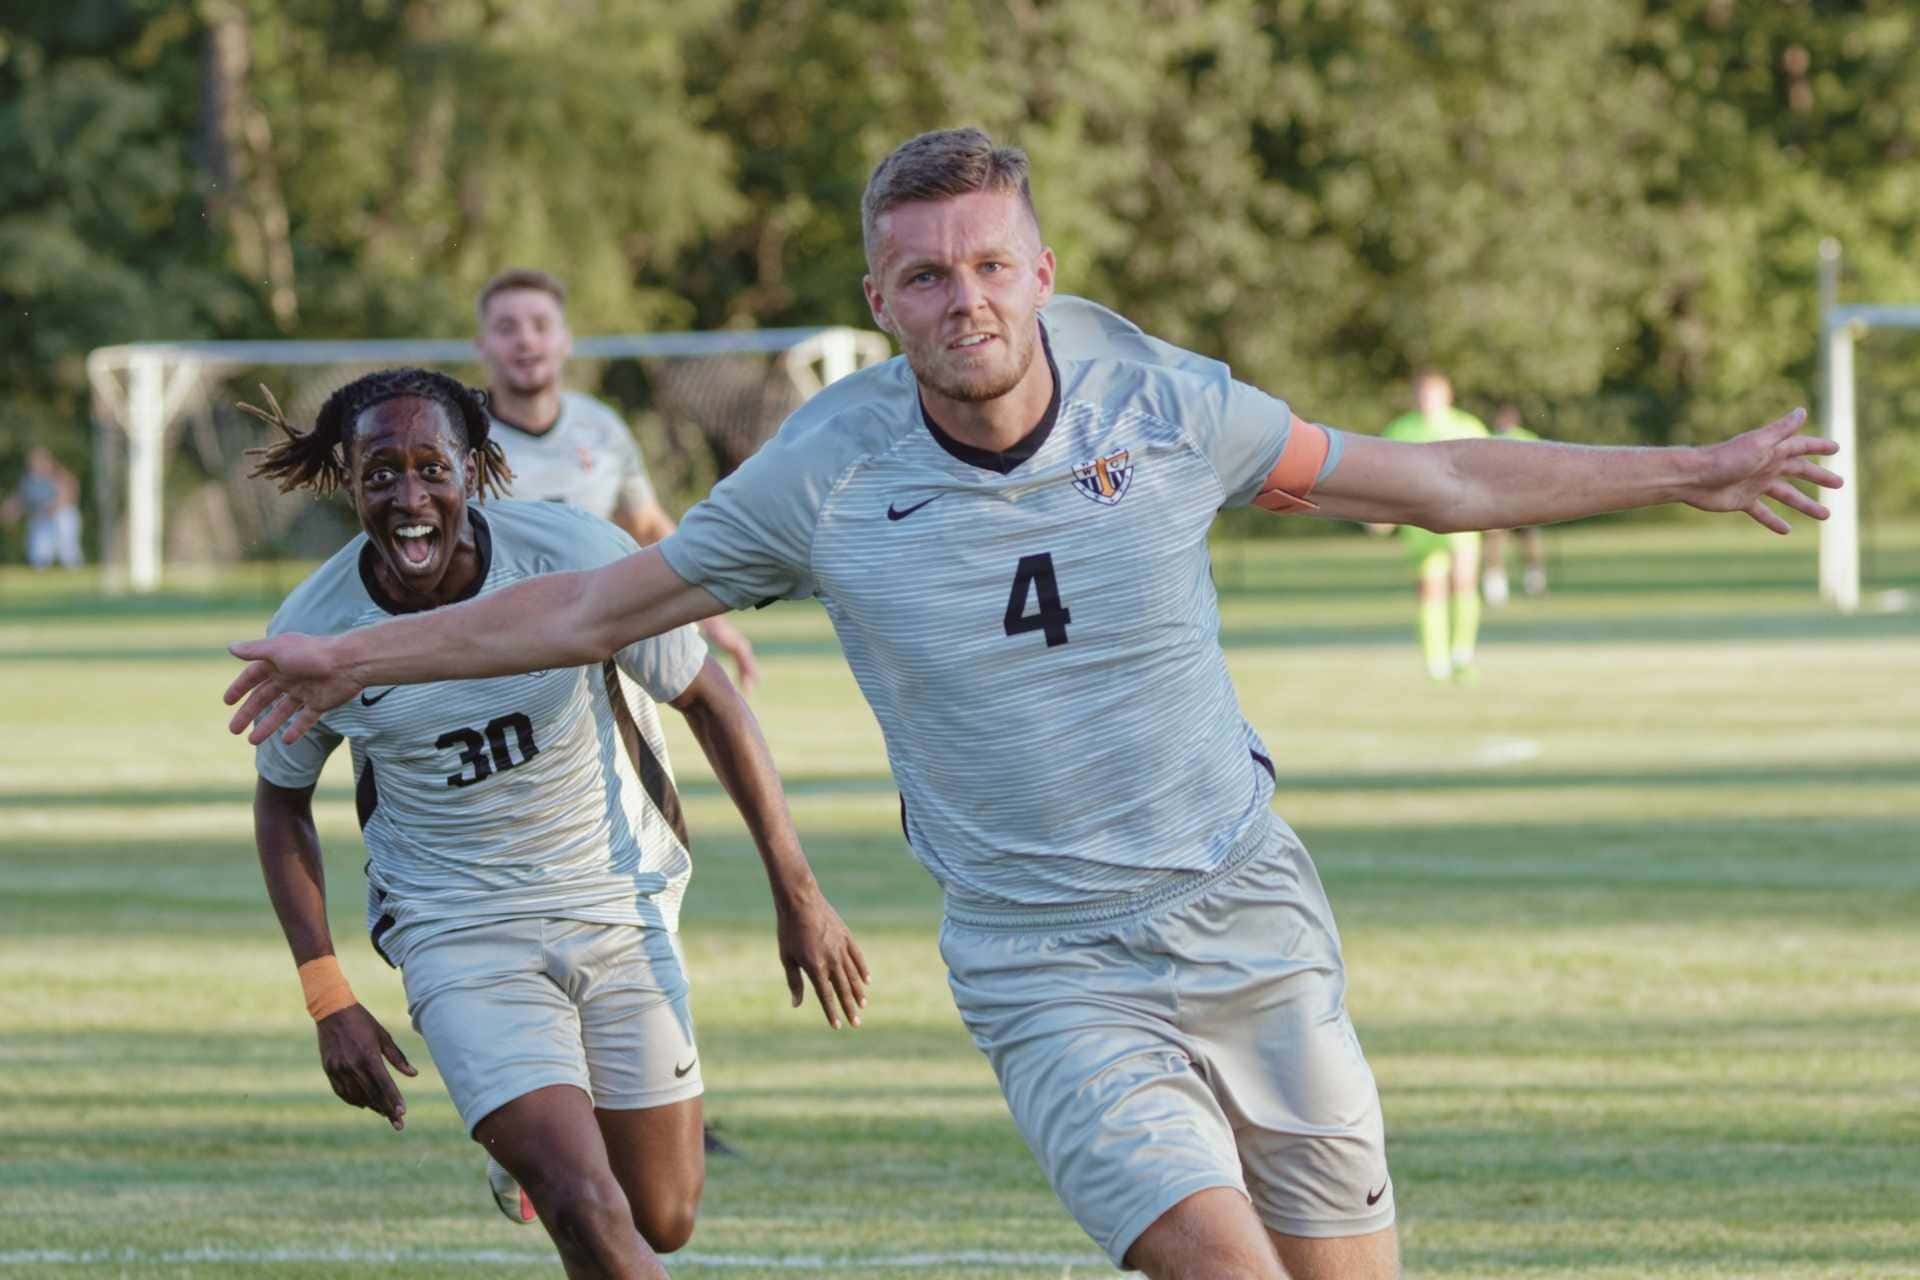 Connor Hartwell (4) celebrates after scoring on a free kick in Thursday's season opener against Cal. Also pictured is Chris Irakoze (30).